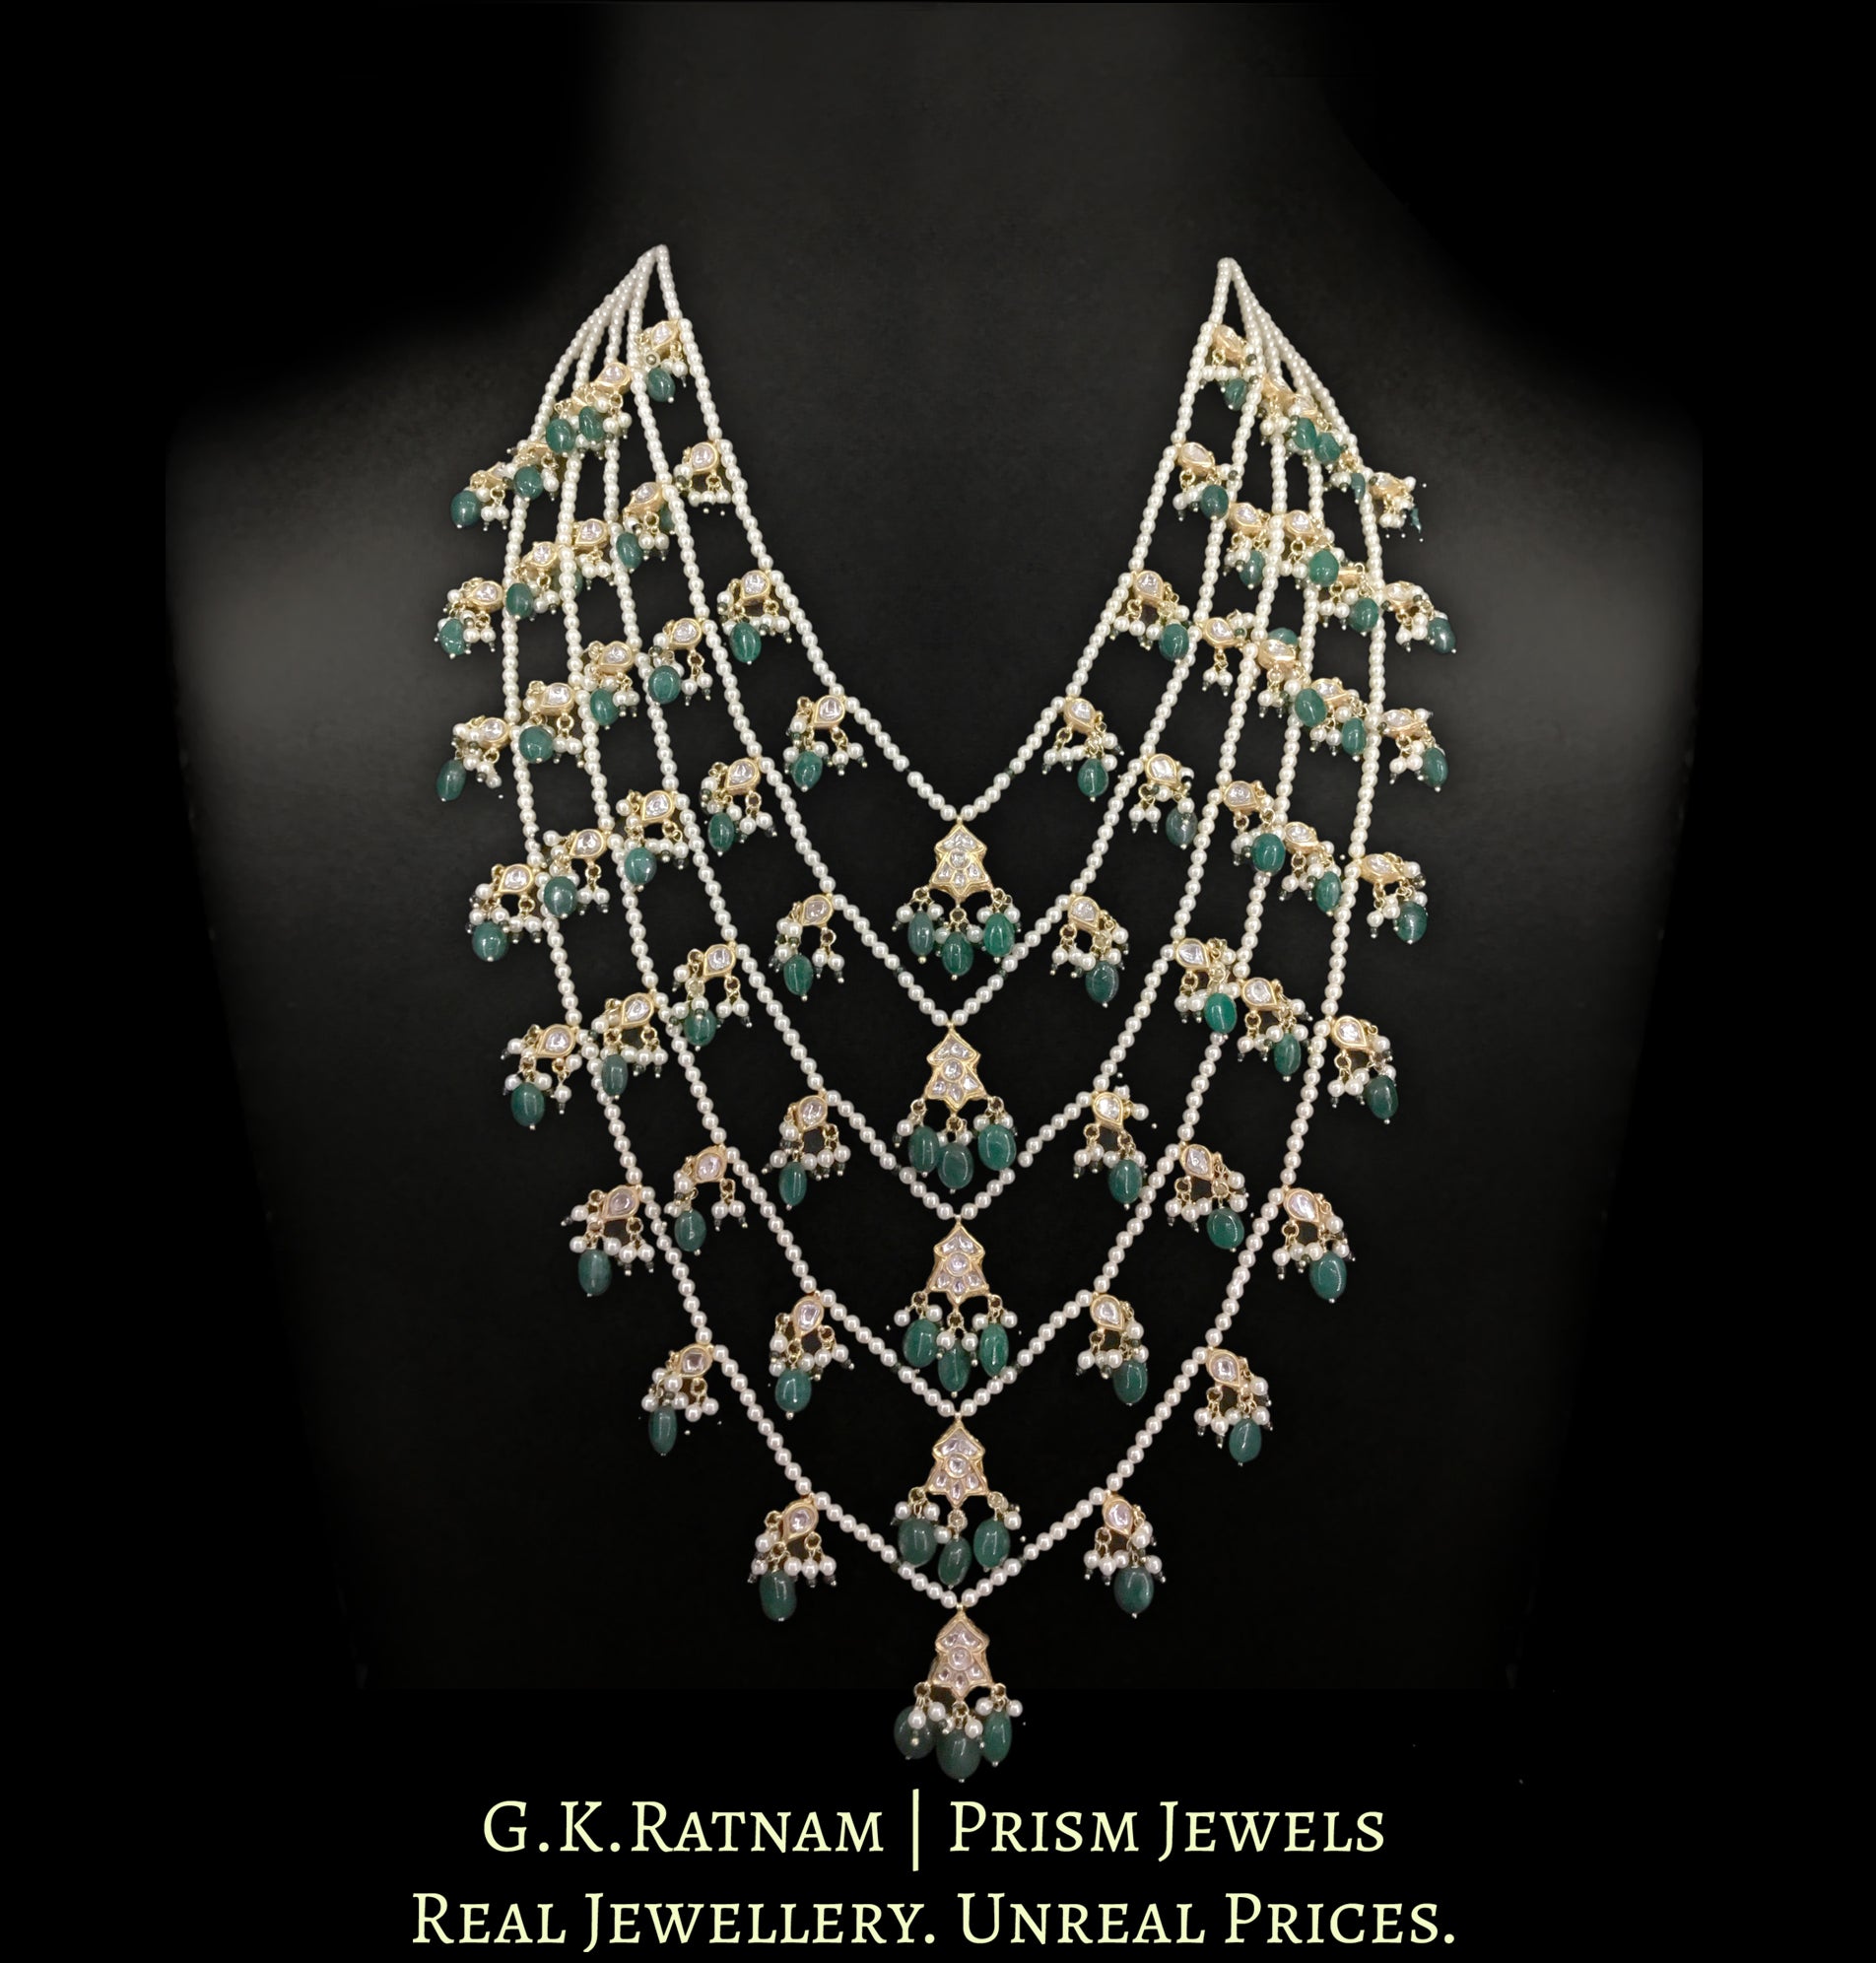 23k Gold and Diamond Polki Panch-Lad (five-row) Necklace with Green Beryls and Pearls